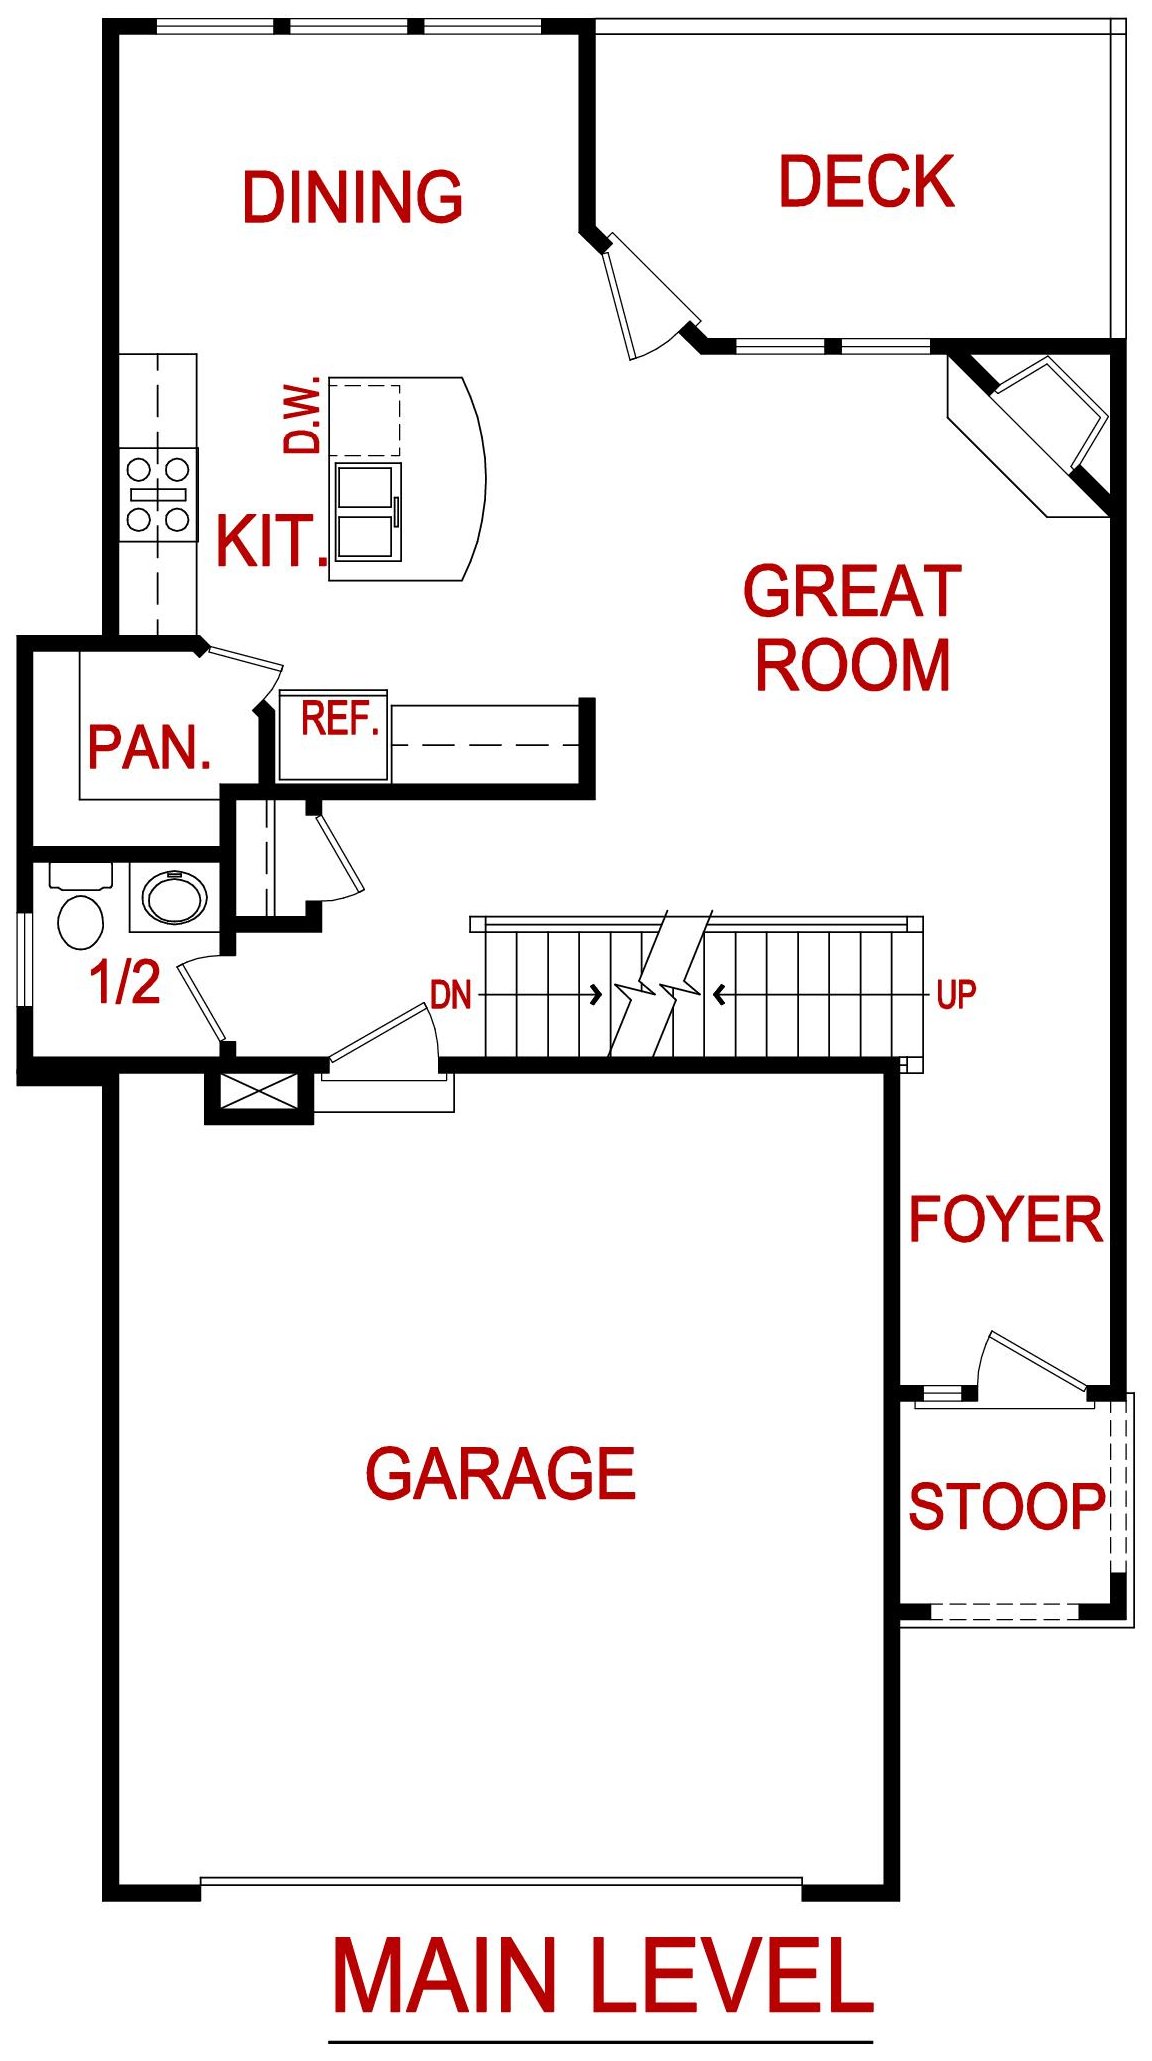 floorplan for 6923 W. 162nd Ct., Overland Park, KS from lambie homes